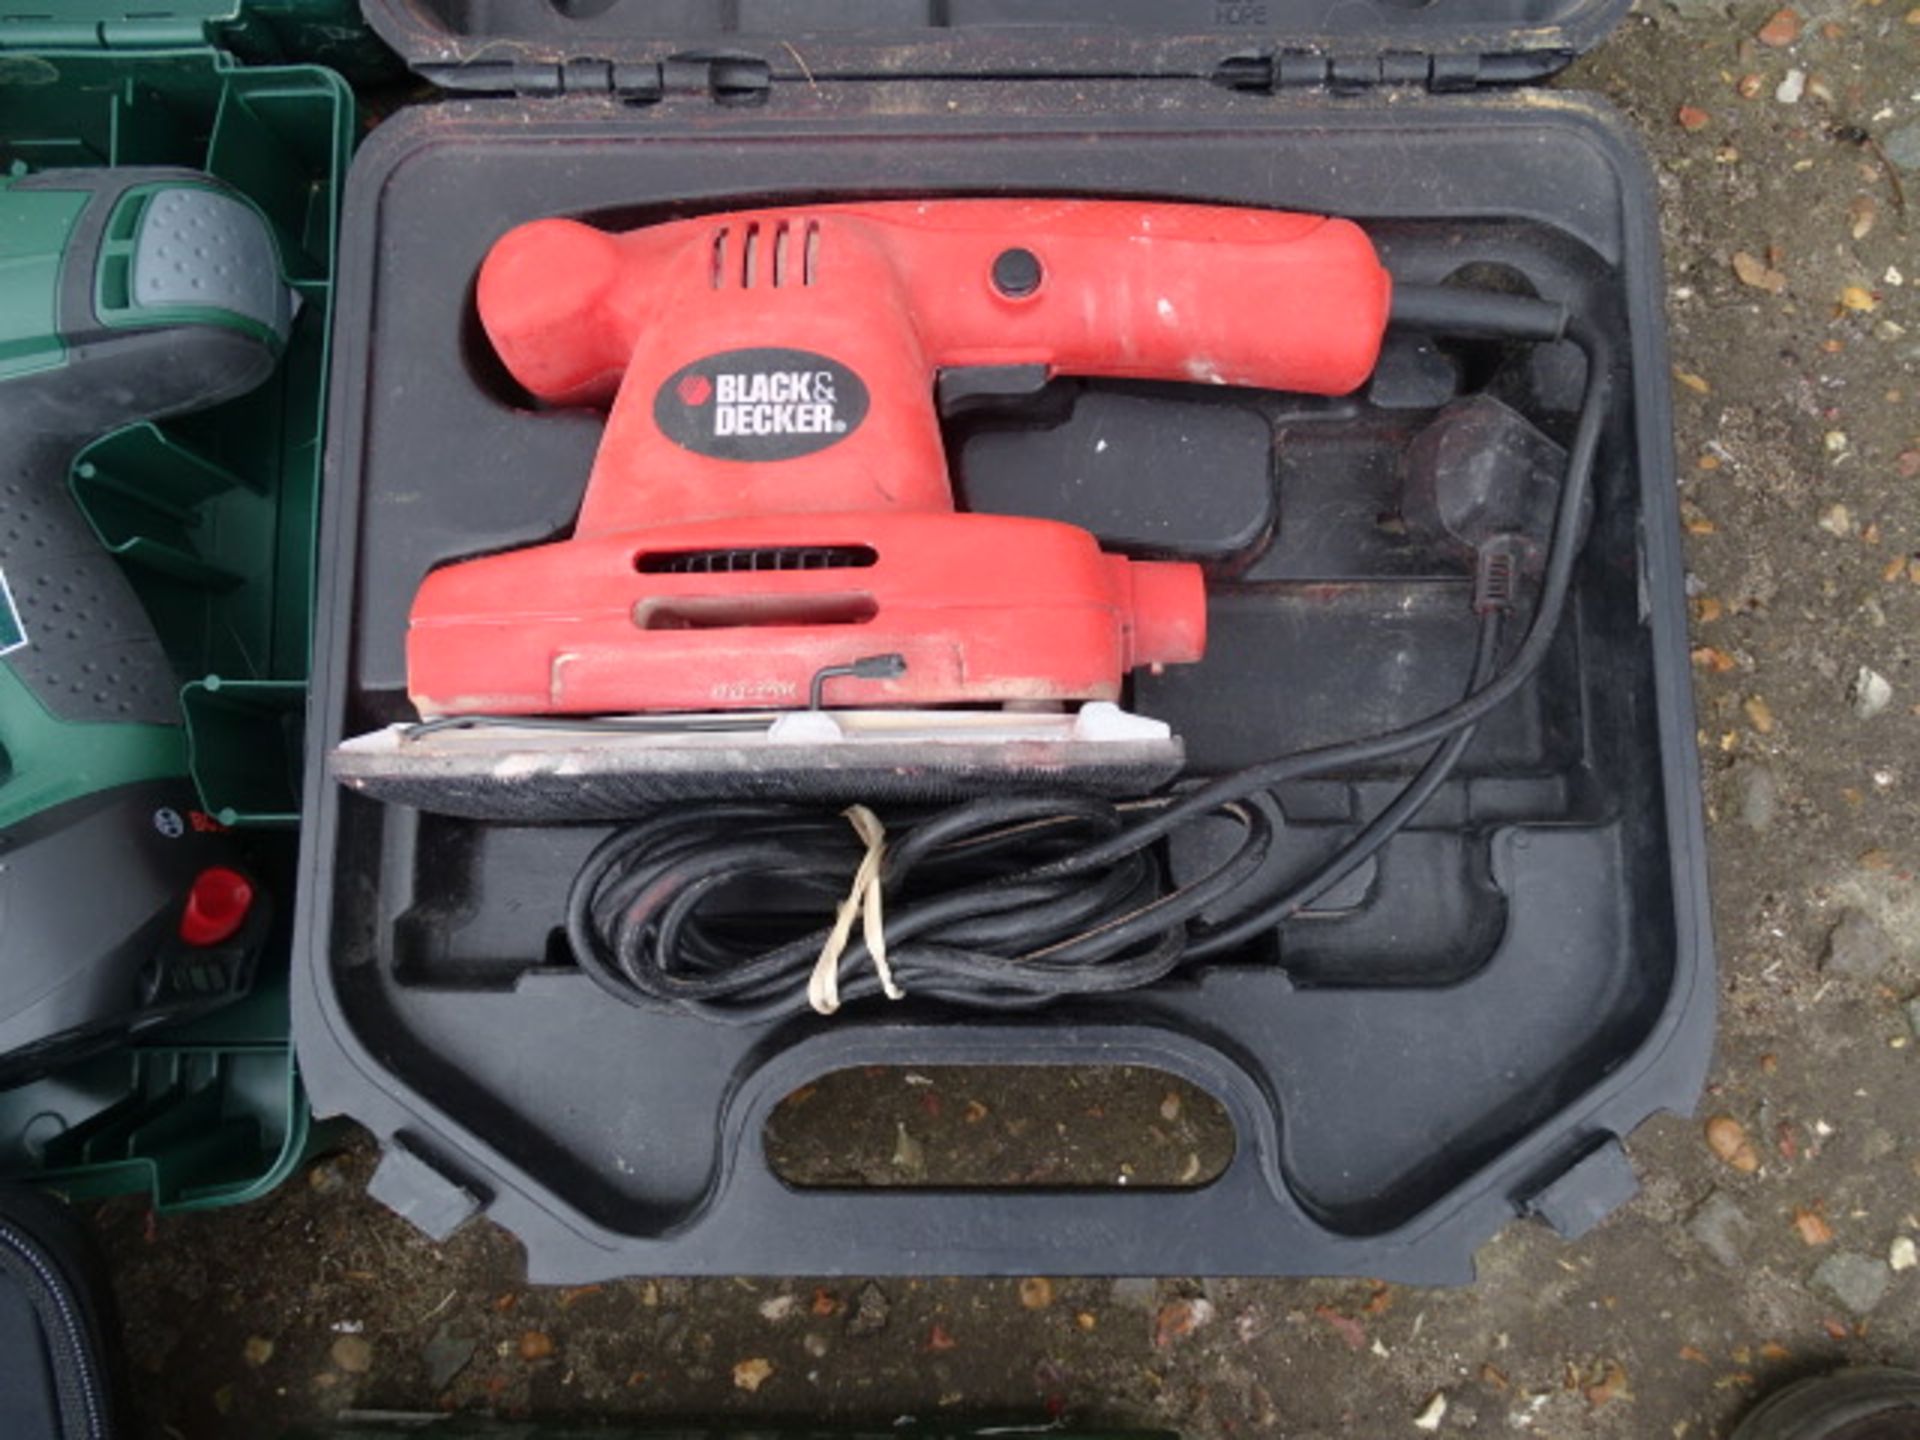 Bosch cordless lithium drill, garden trimmer and Black & Decker sander, all from a house clearance - Image 2 of 7